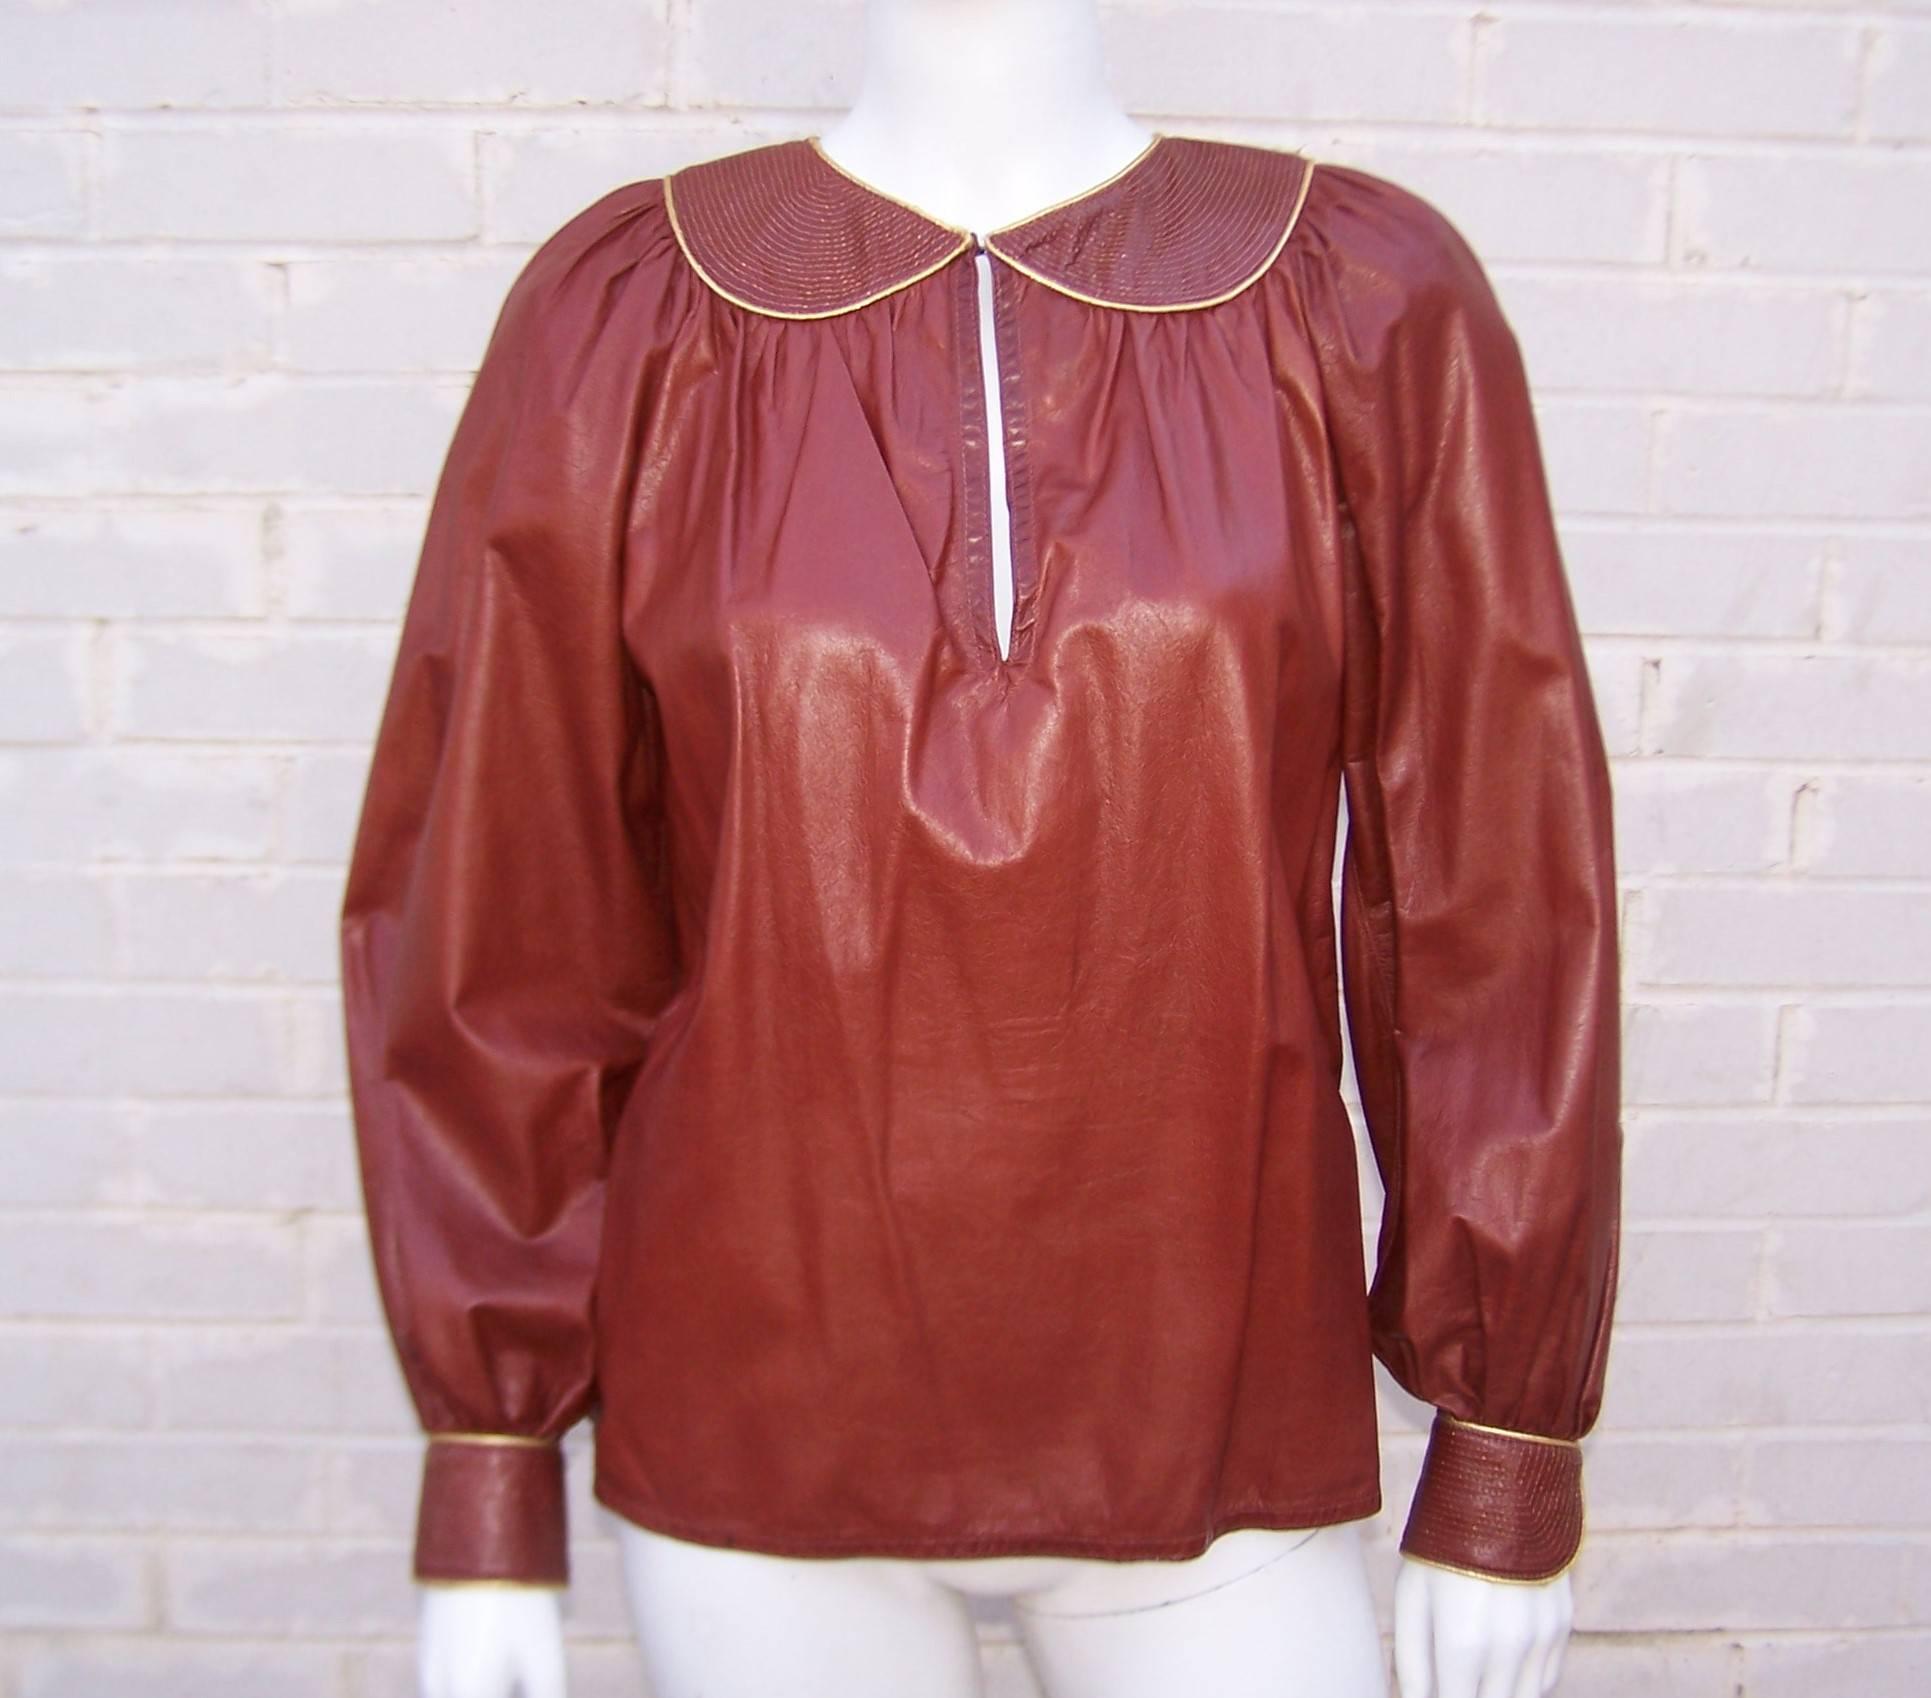 This 1970's leather top by Geoffrey Beene epitomizes classic American style ... the combination of luxurious details in a comfortable design.  The rich oxblood leather is supple and lightweight enough to sensually drape the torso with smock top